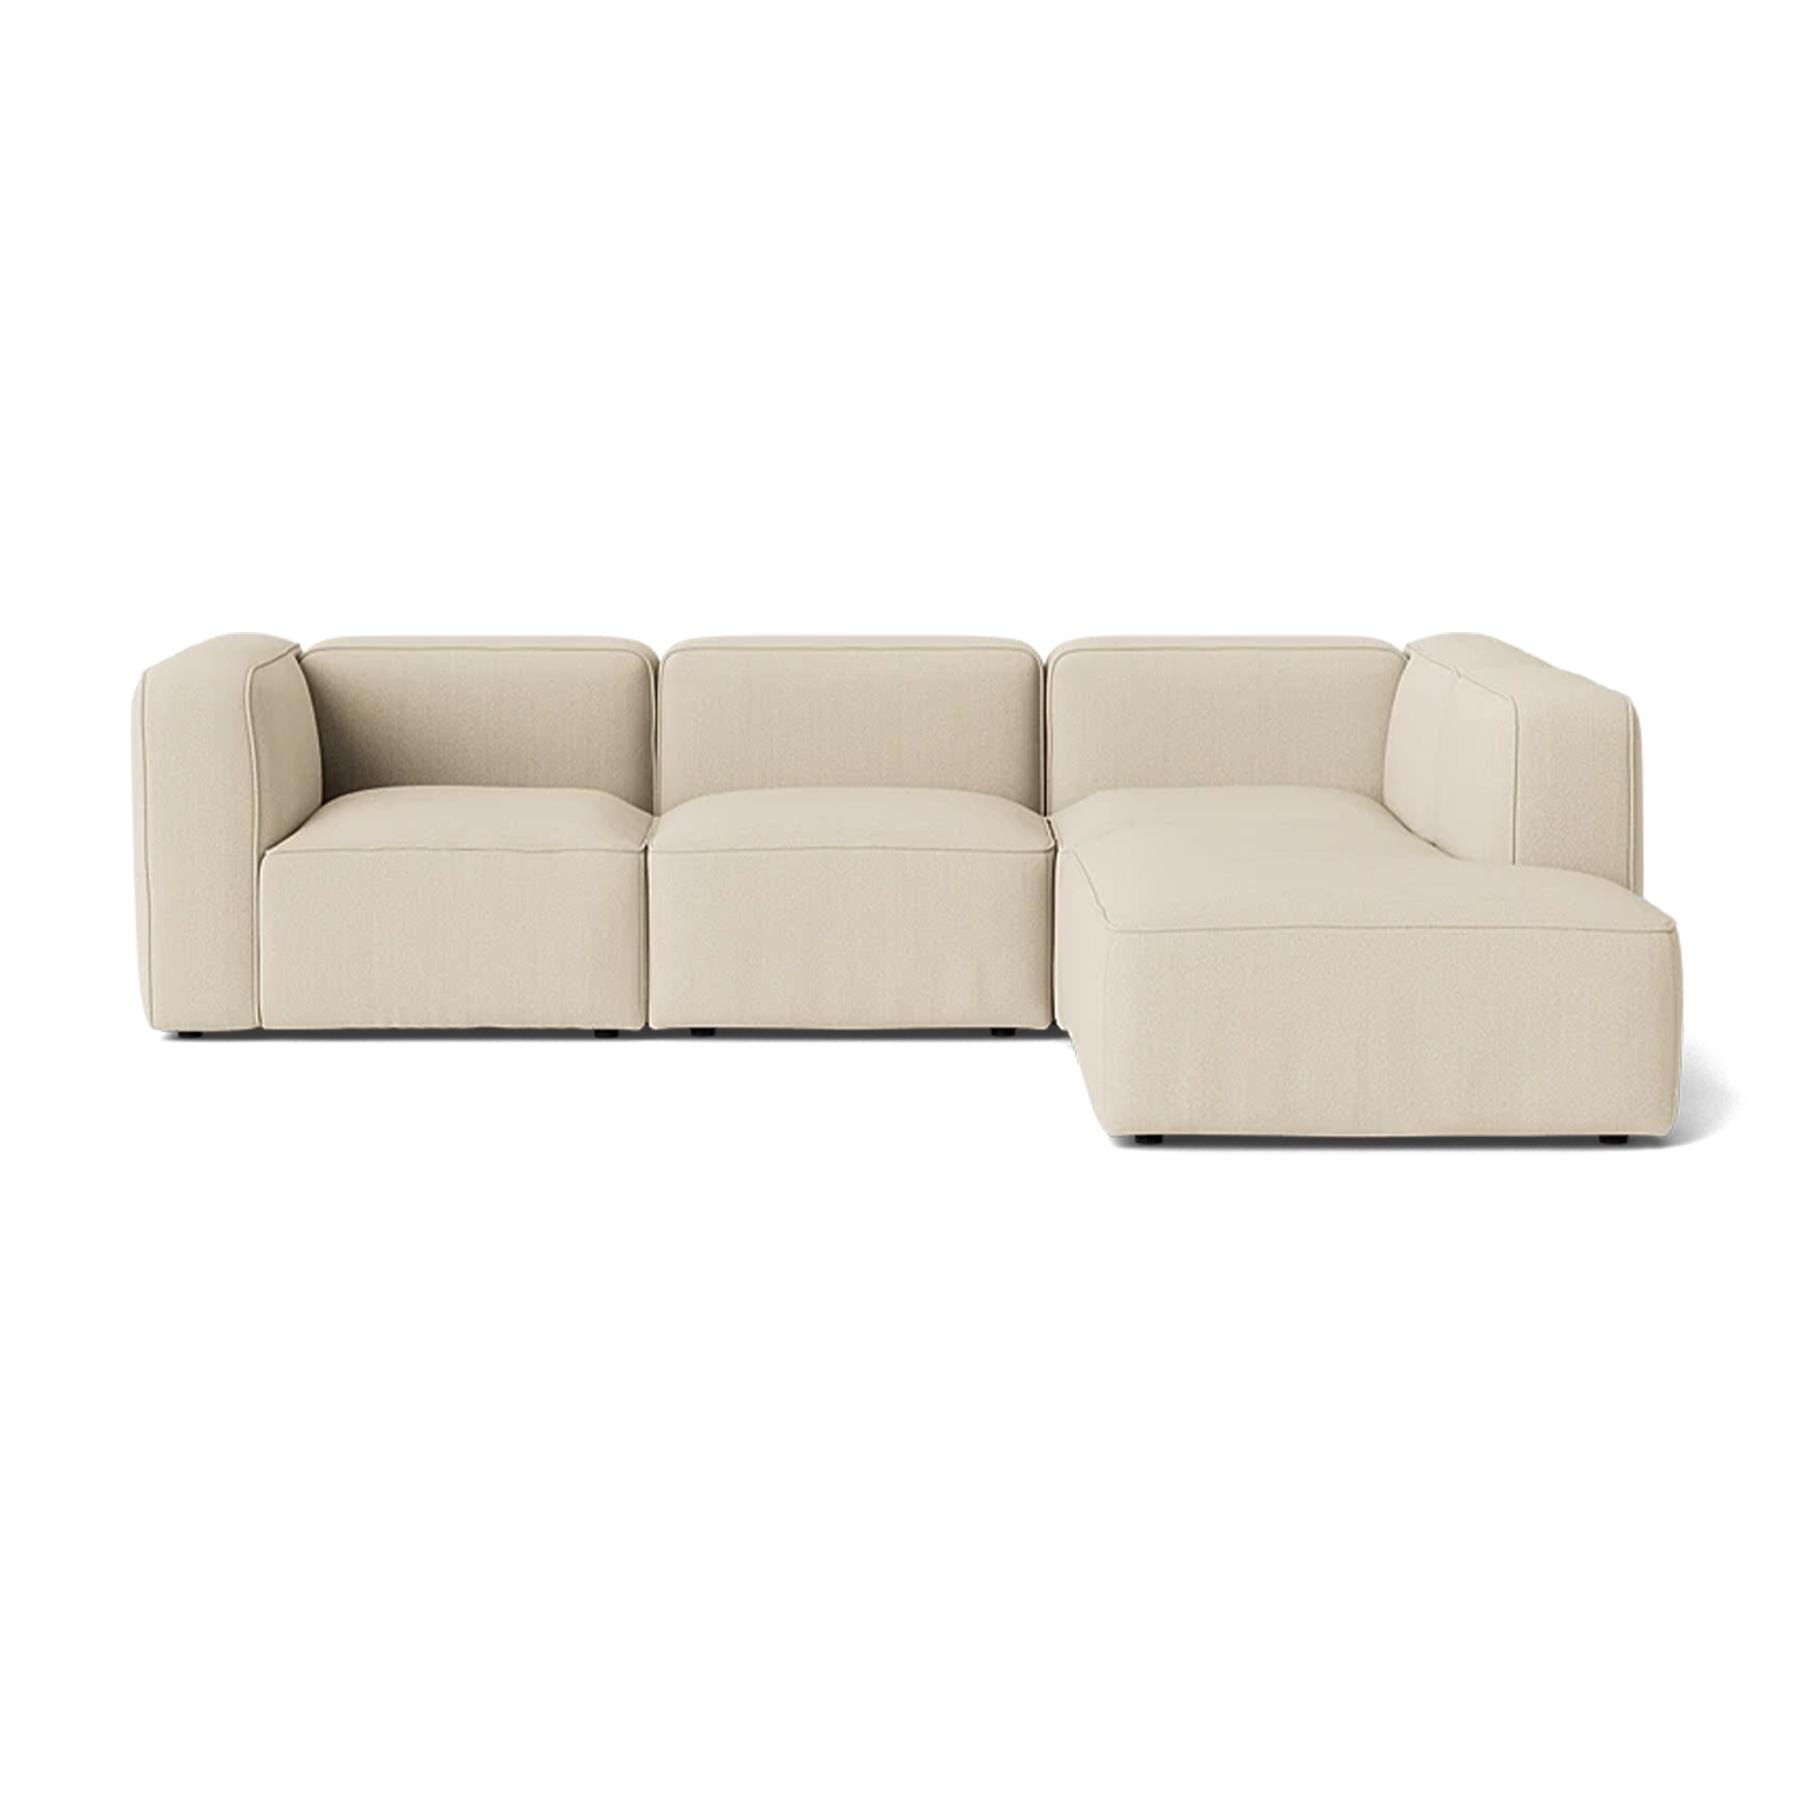 Make Nordic Basecamp Small Family Sofa Hallingdal 200 Right Cream Designer Furniture From Holloways Of Ludlow